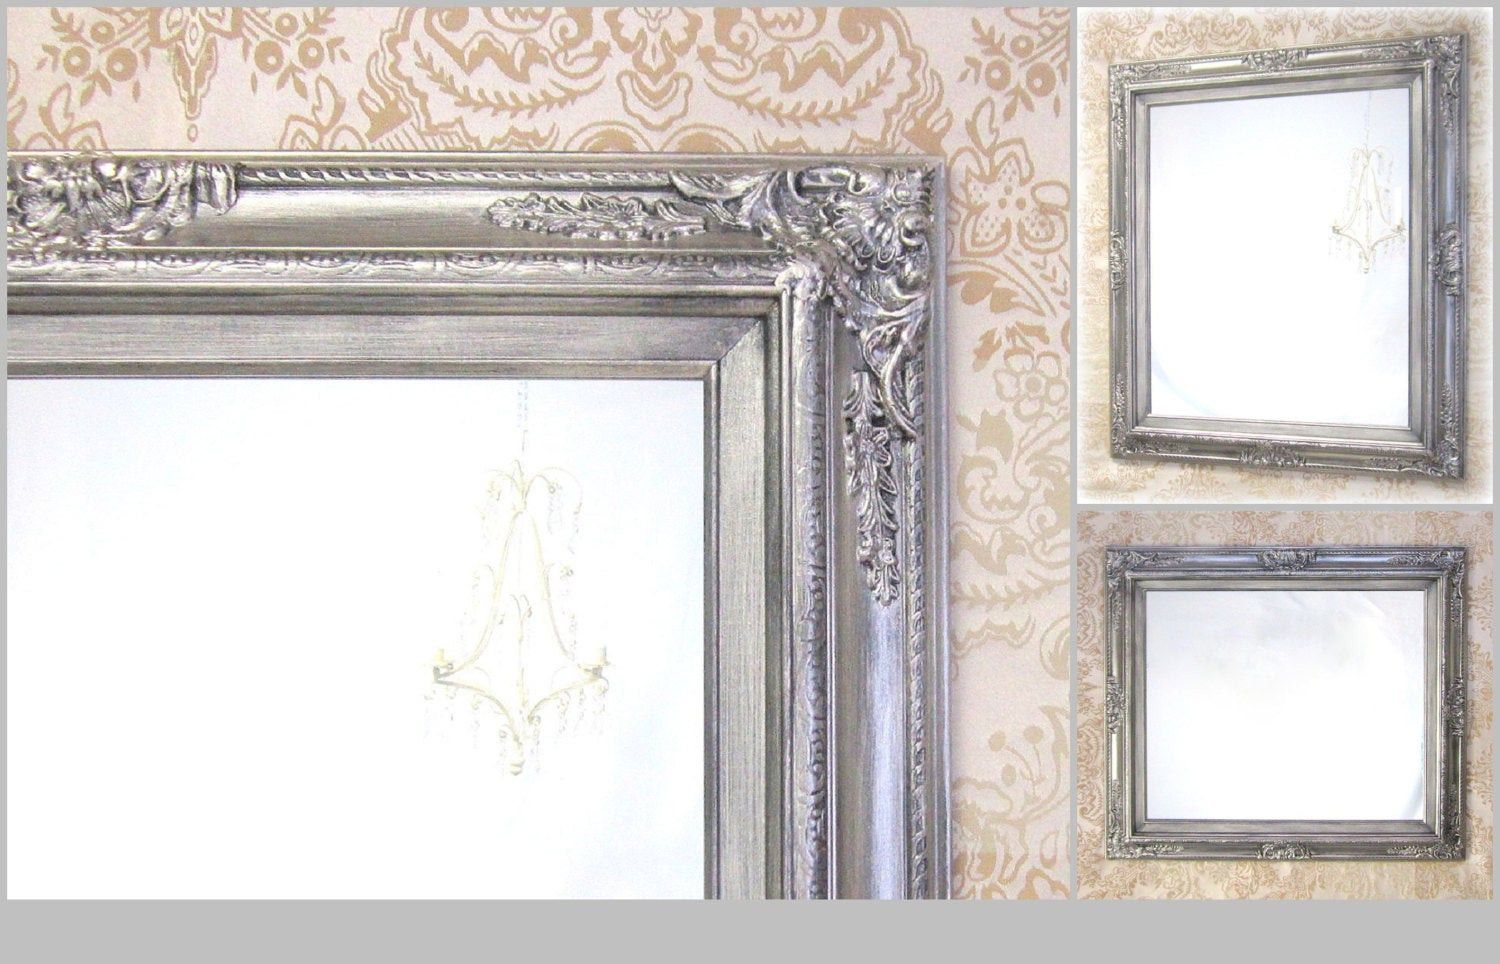 Brushed Nickel Bathroom Mirrors
 ANY COLOR Brushed Nickel Bathroom Mirror Framed by